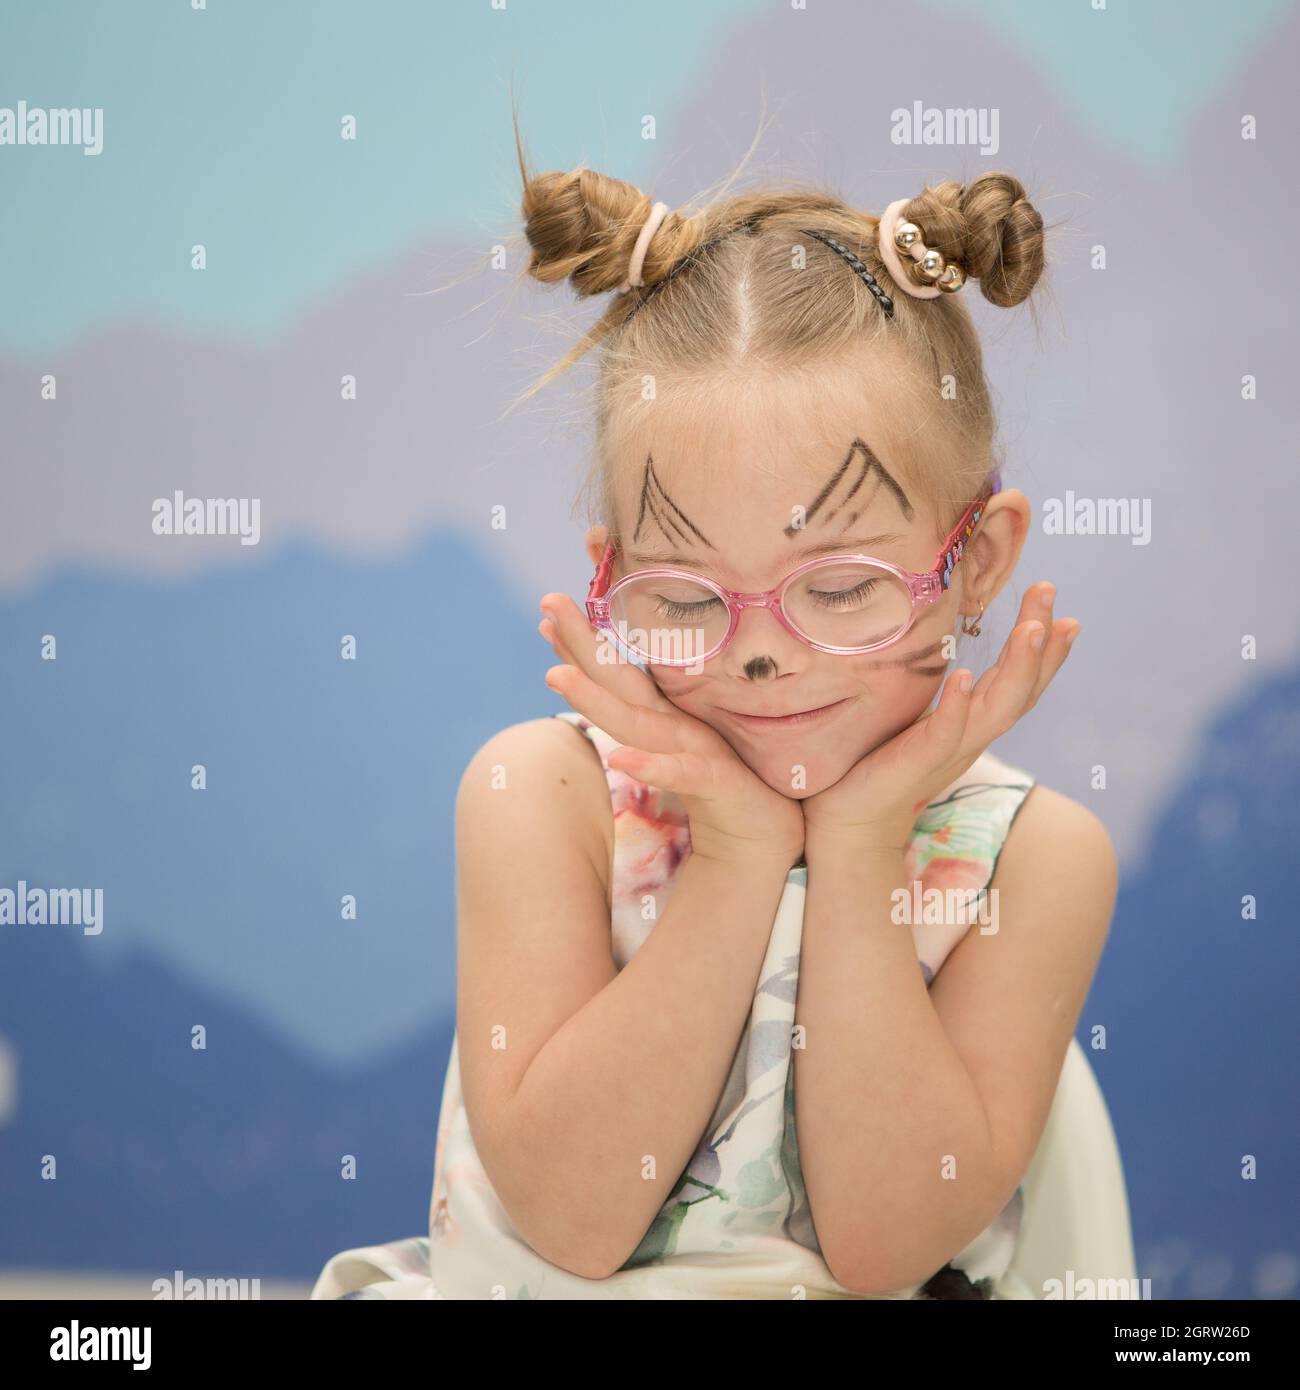 Beautiful girl with Down syndrome with aqua makeup for her birthday Stock Photo